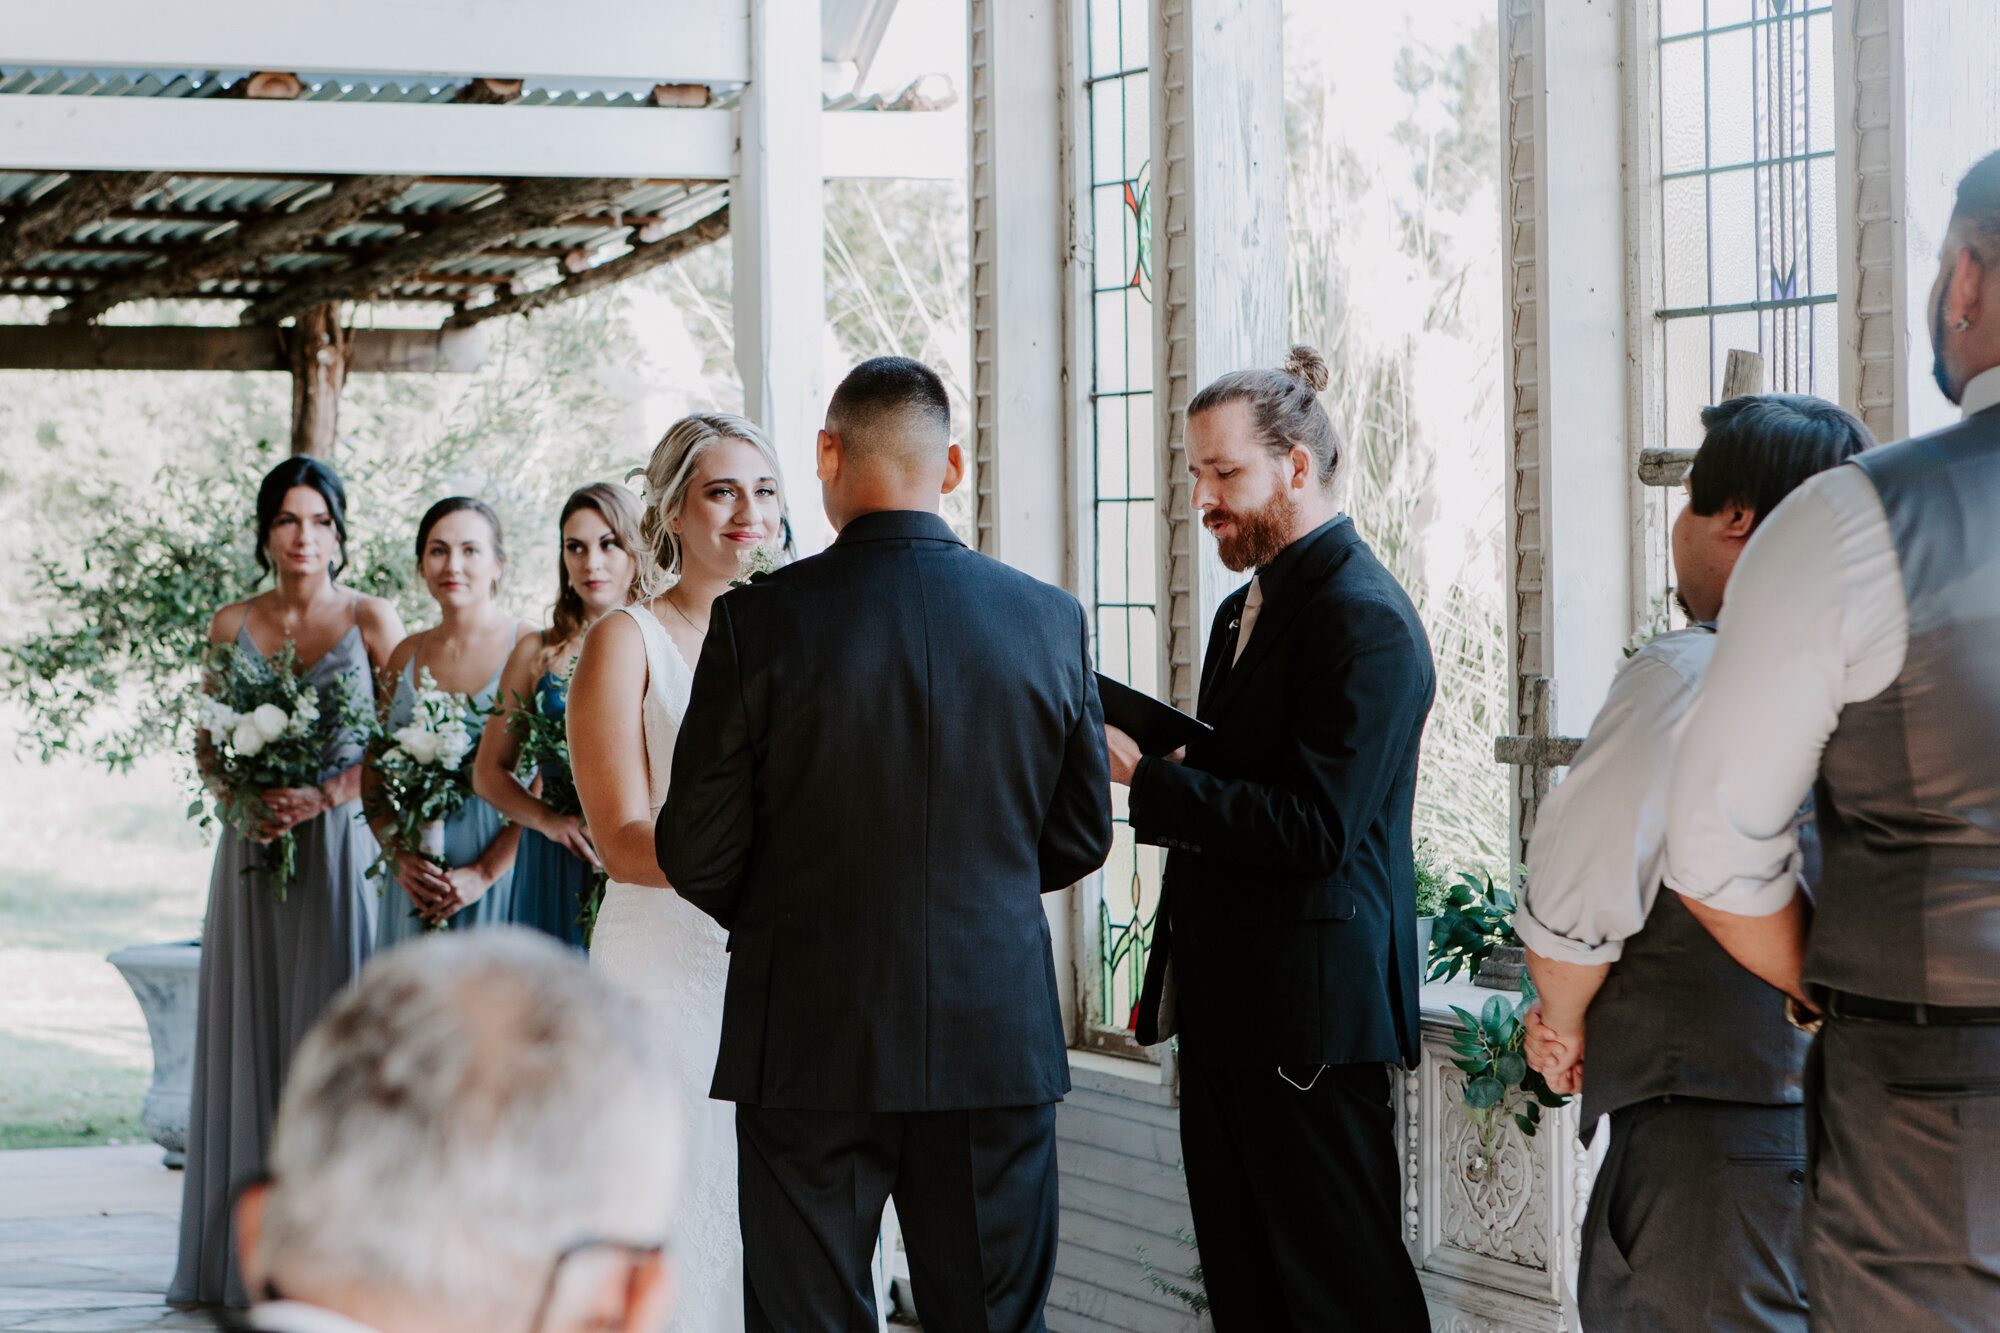 Bride looking at groom. Ceremony. Radiant Bohemian Hill Country Wedding at Gruene Estate in New Braunfels, TX